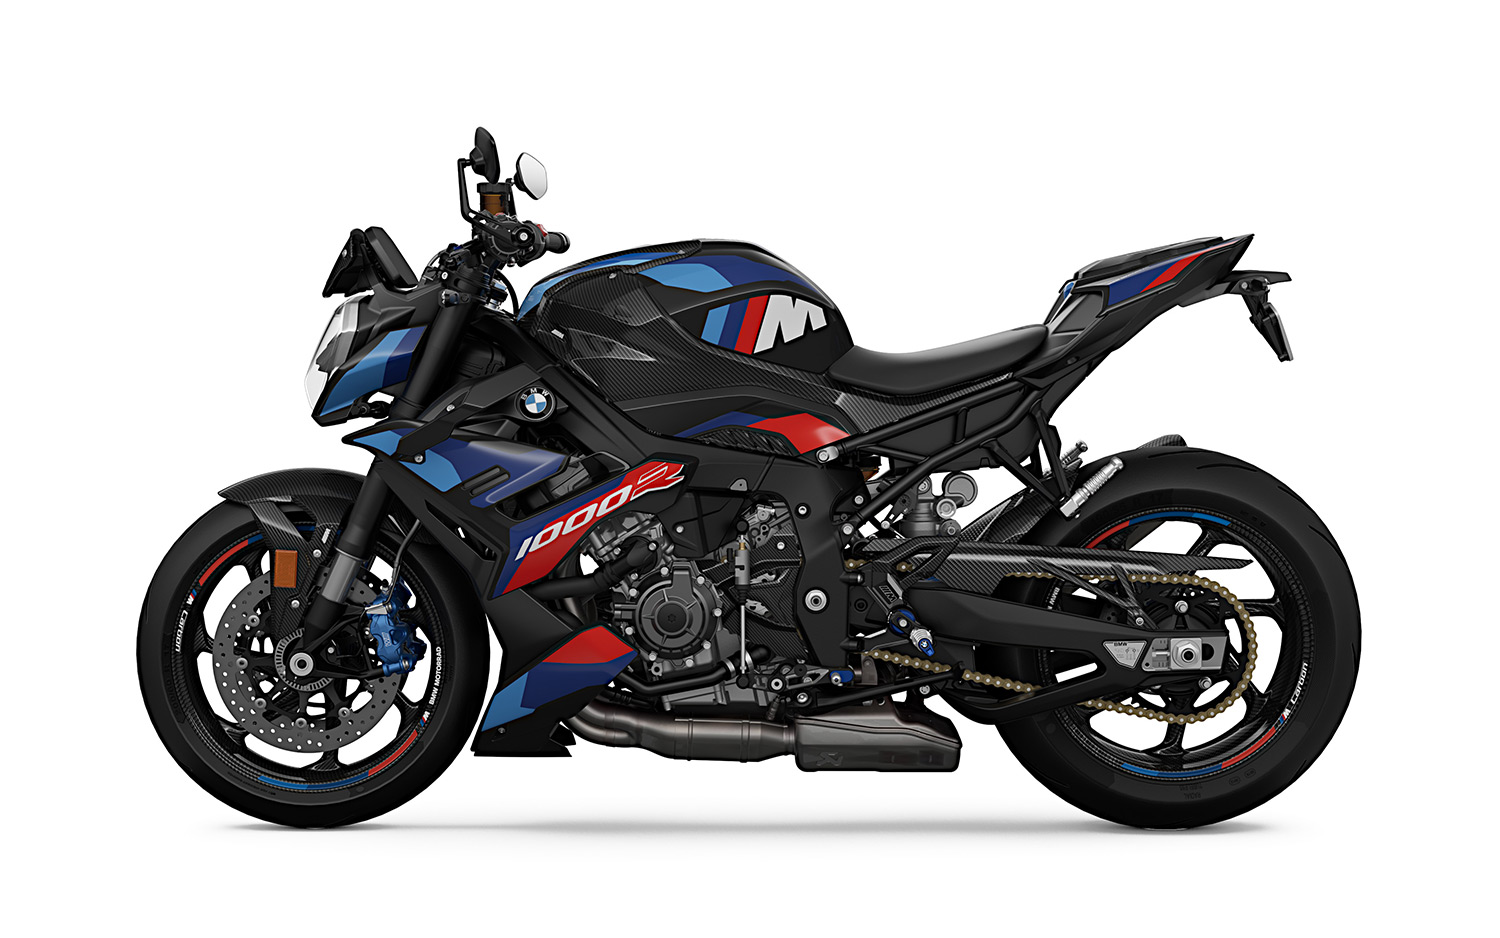 The 2023 BMW M 1000 R motorcycle